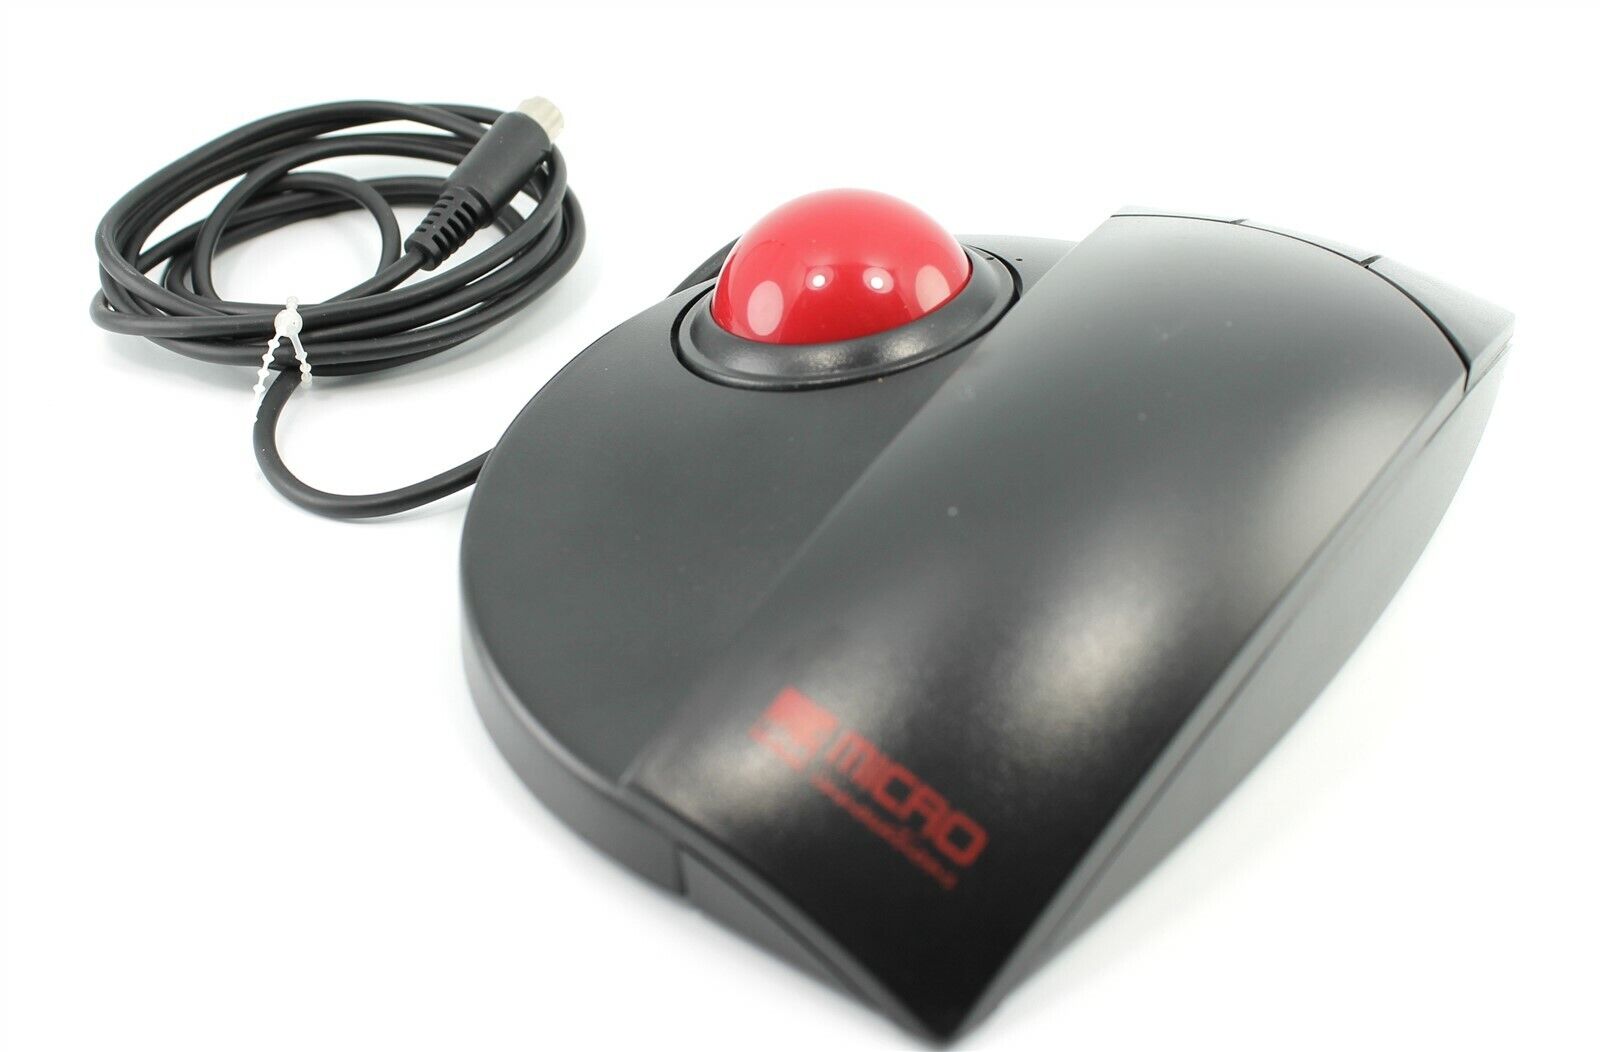 MICRO Innovations STK-3000 WEB Track Wired Mouse WORKING